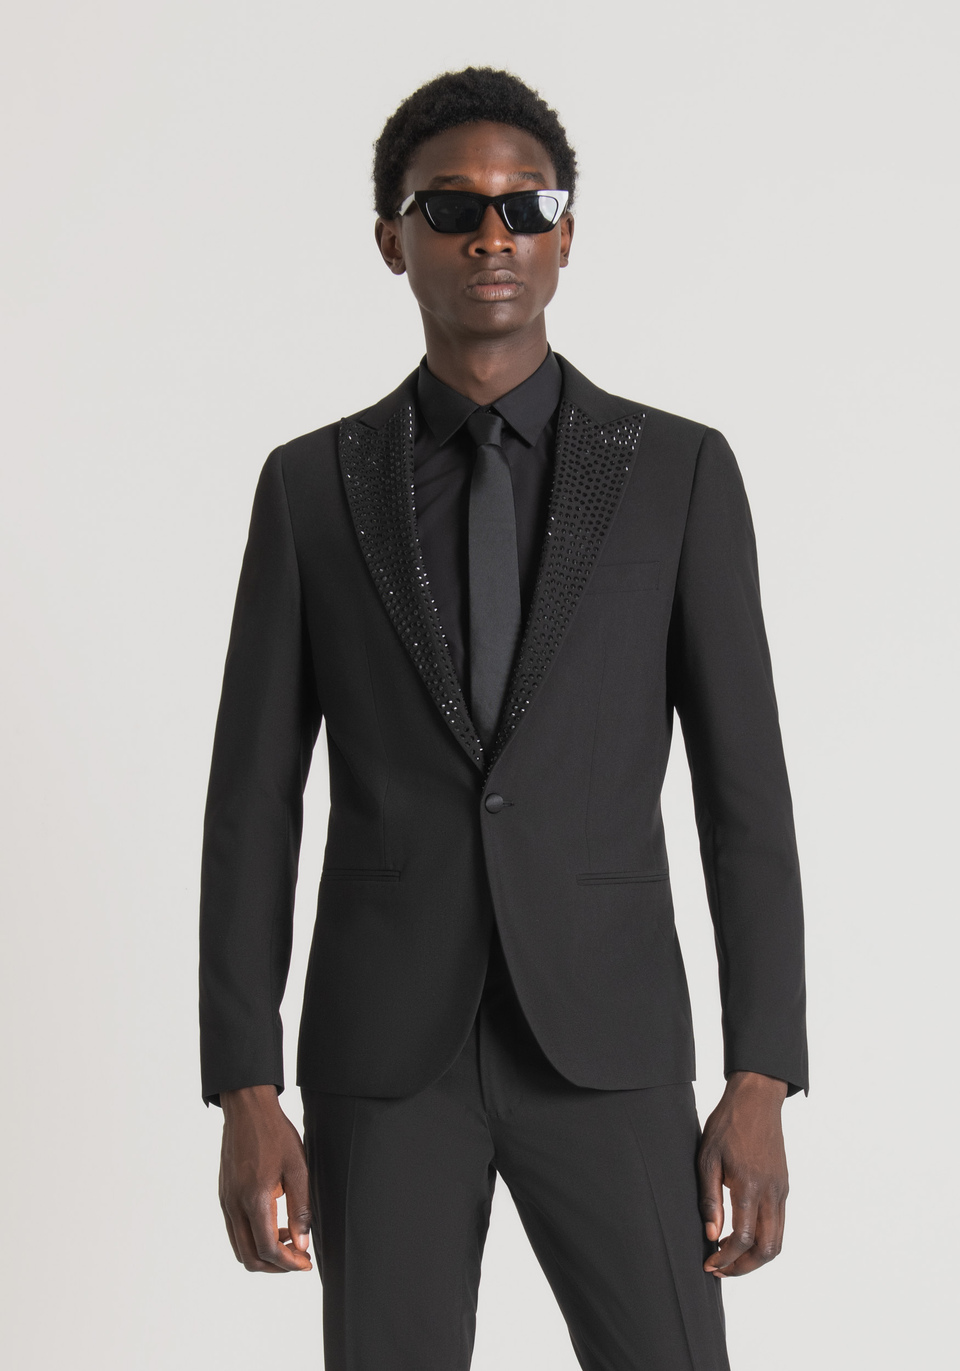 "VIVIENNE" SLIM FIT JACKET IN STRETCH VISCOSE BLEND FABRIC WITH MICRO APPLICATIONS ON THE LAPELS - Antony Morato Online Shop